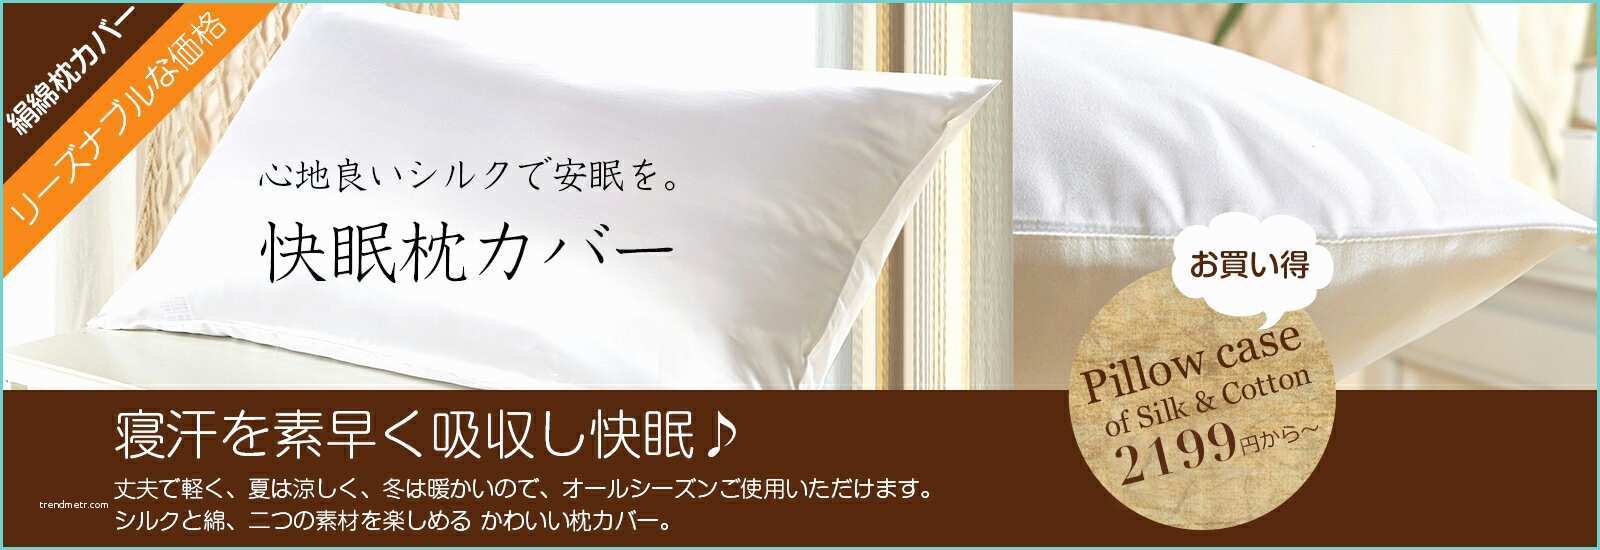 Lily Silk Pillowcases シルク 寝具カバーセット